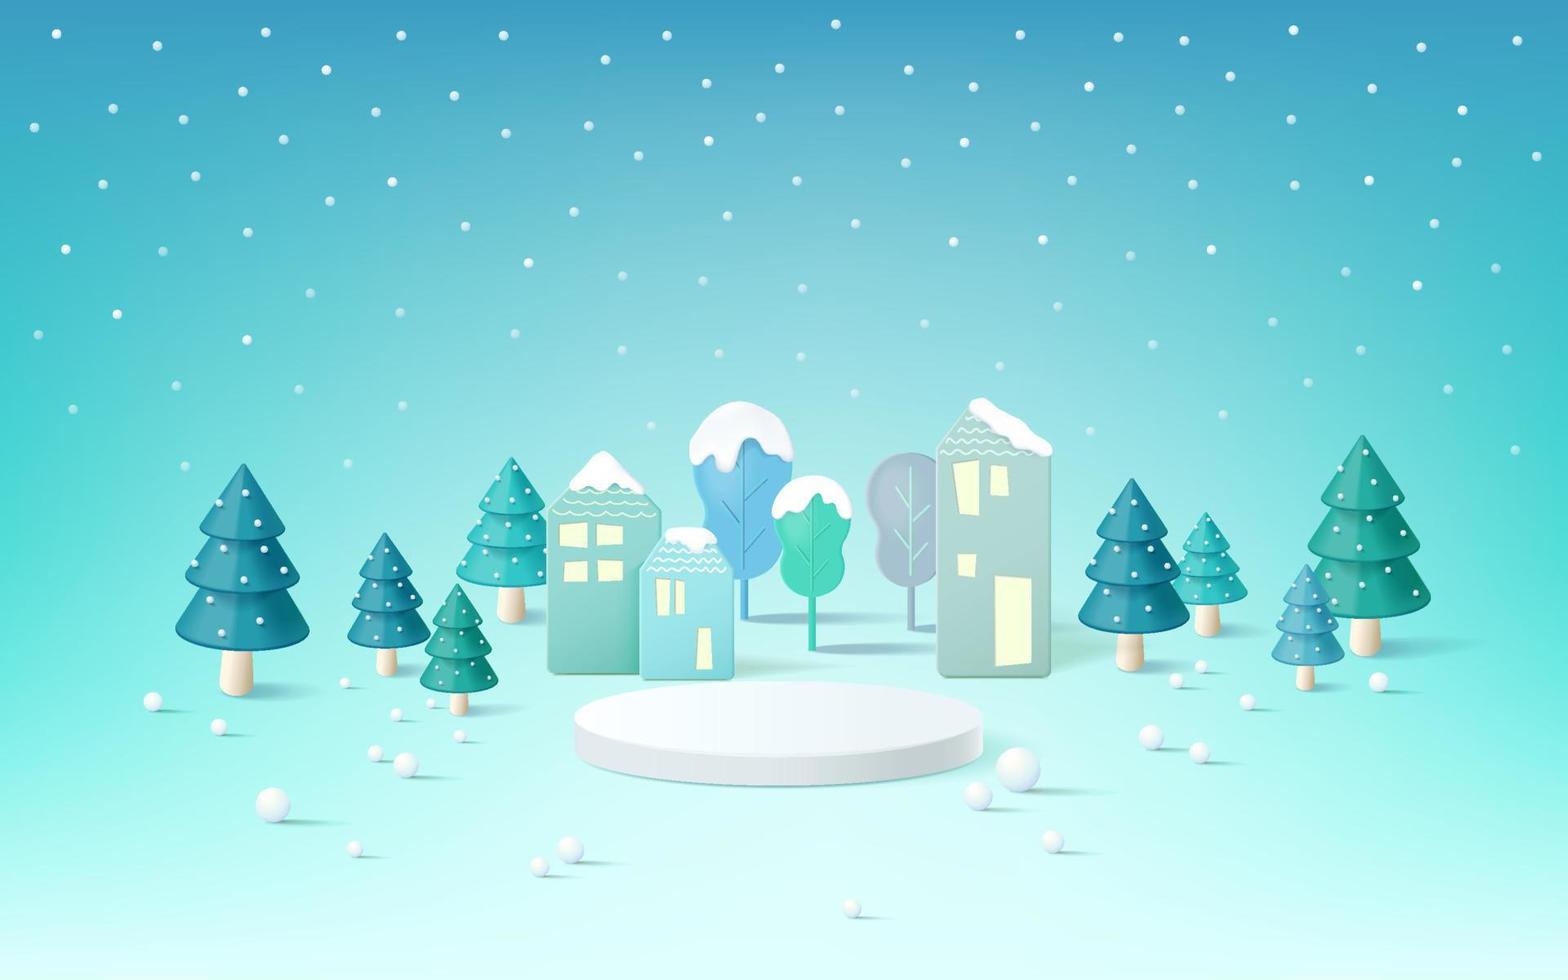 Display background with winter scene for product presentation vector